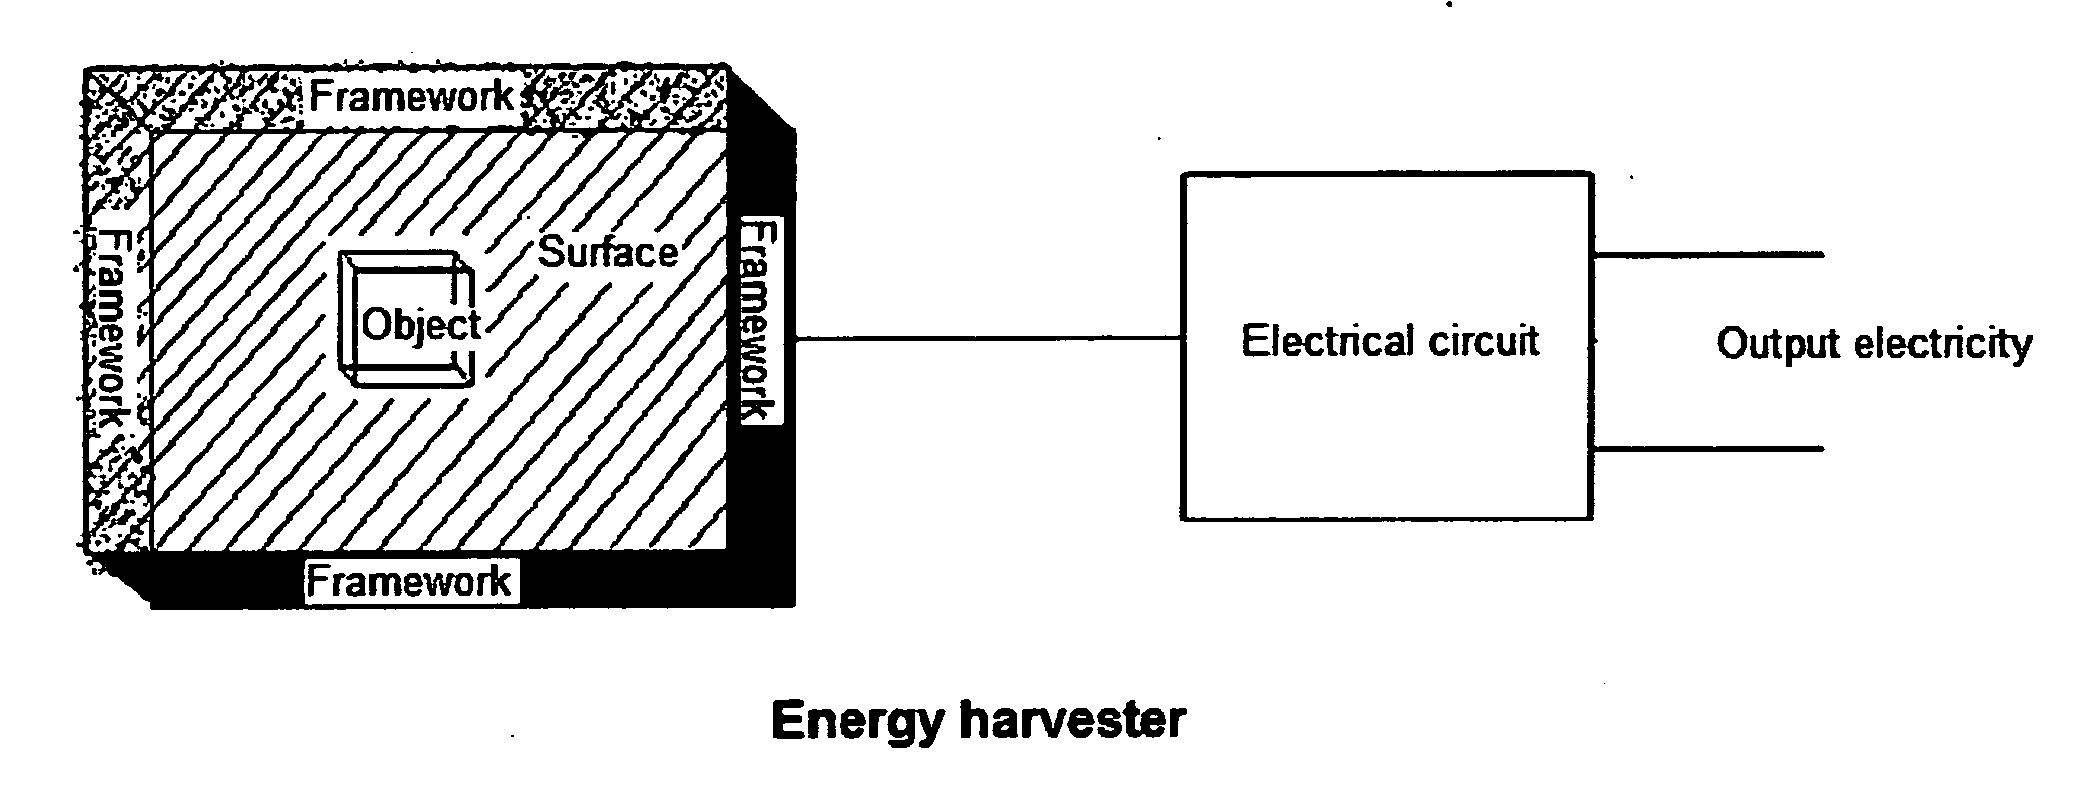 Method, System, Apparatus to generate electricity from objects under motion